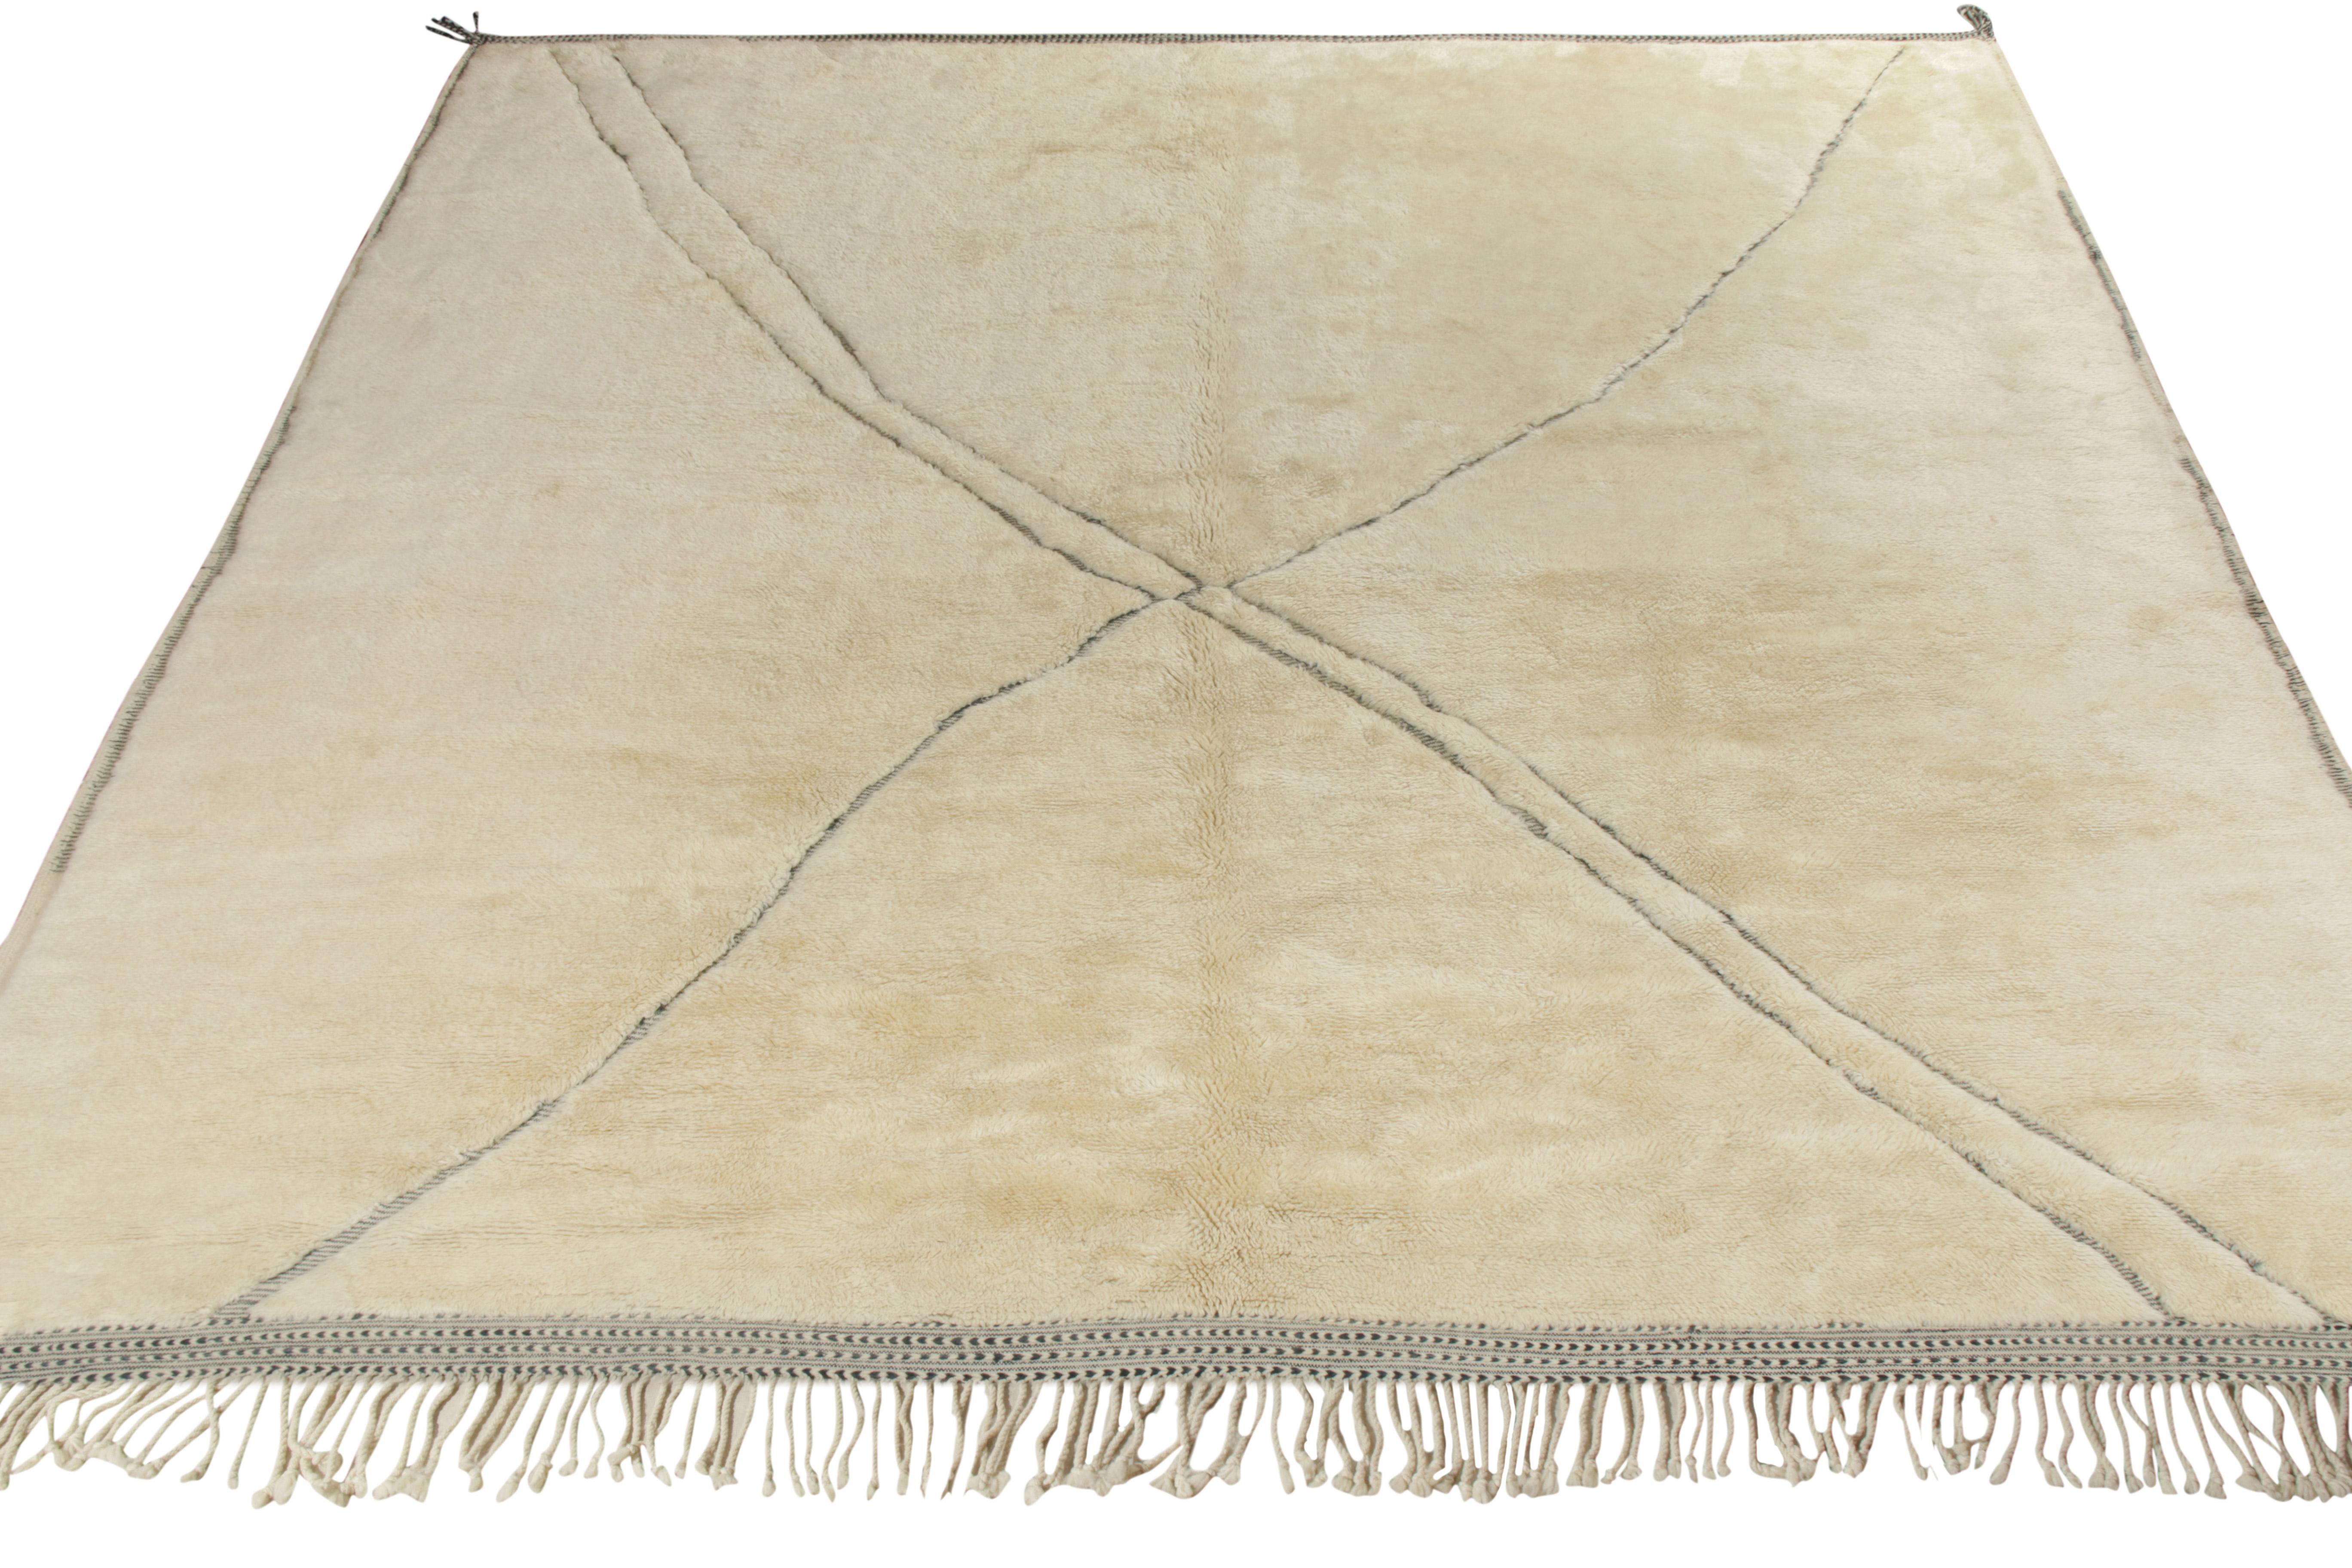 Hand knotted in quality wool, a contemporary custom design from Rug & Kilim’s Moroccan rug collection. Exemplified in this 13x13 edition, while the field revels in the exuberance of a creamy beige-white colorway, the rug enjoys a sophisticated look